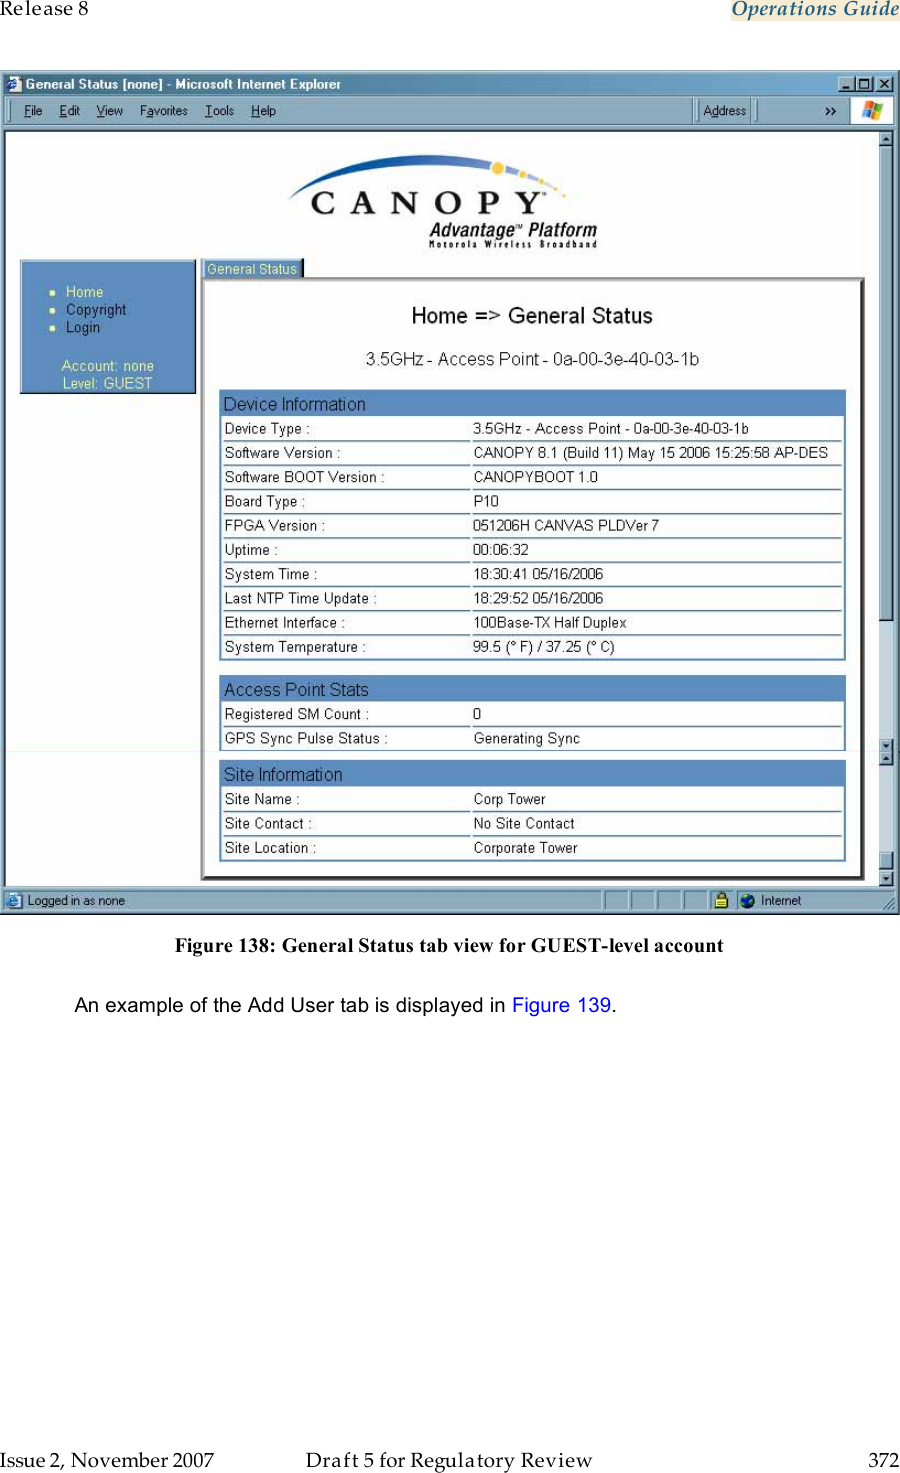 Release 8    Operations Guide   Issue 2, November 2007  Draft 5 for Regulatory Review  372      Figure 138: General Status tab view for GUEST-level account  An example of the Add User tab is displayed in Figure 139. 